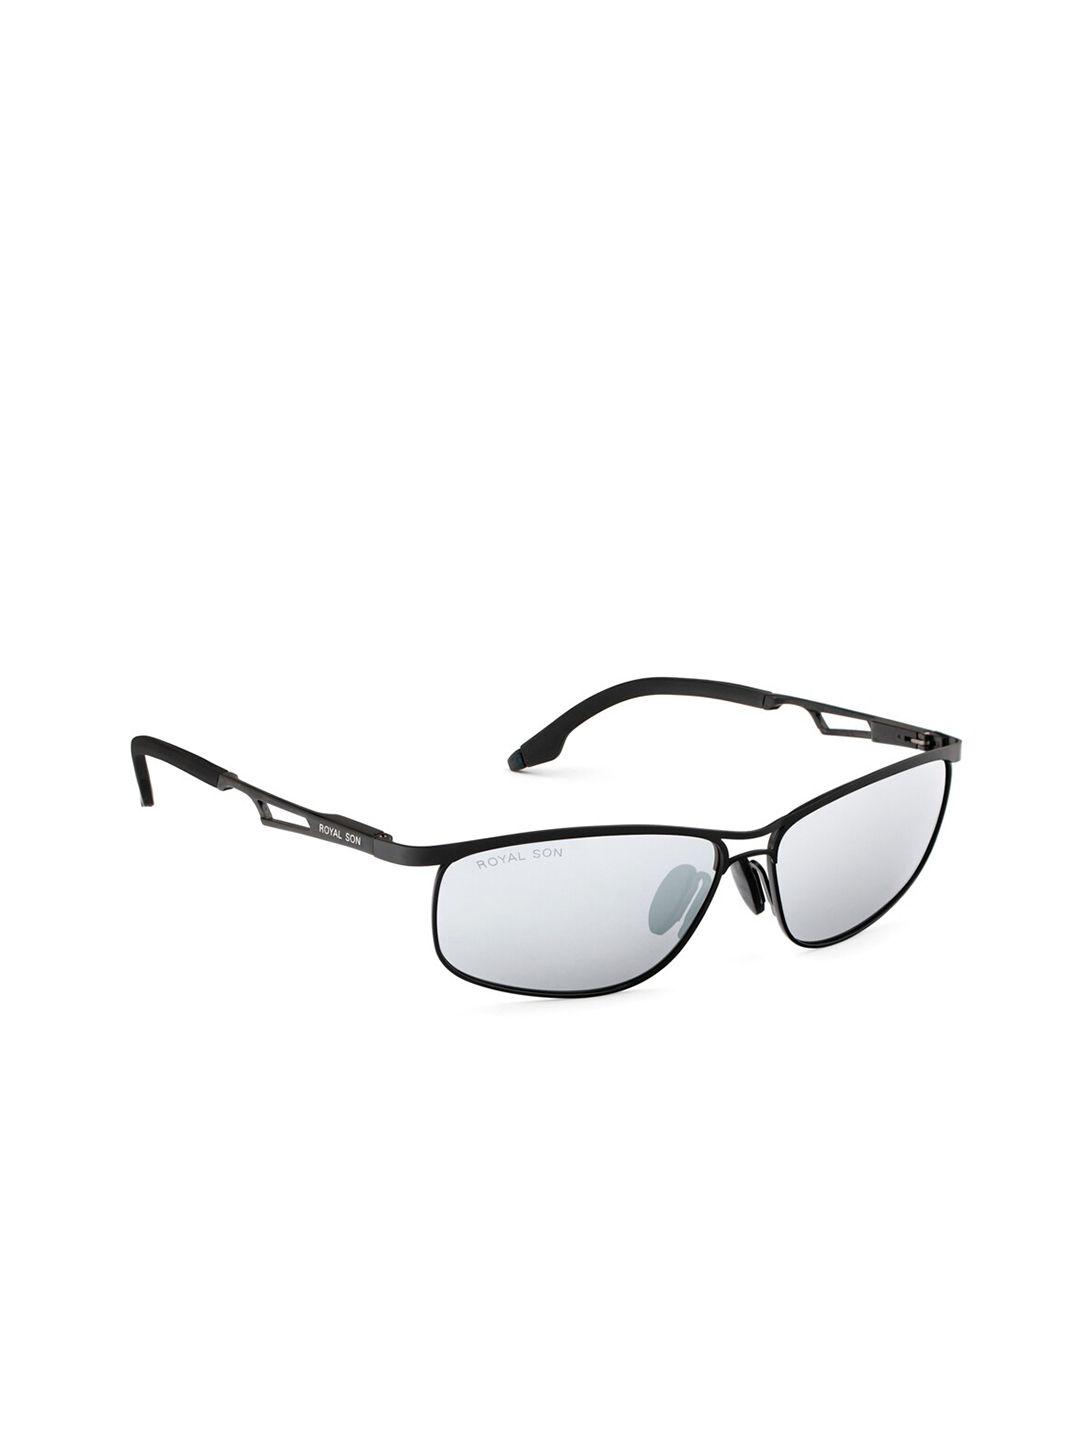 royal son men rectangle sunglasses with polarised and uv protected lens chi00109-c4-r1